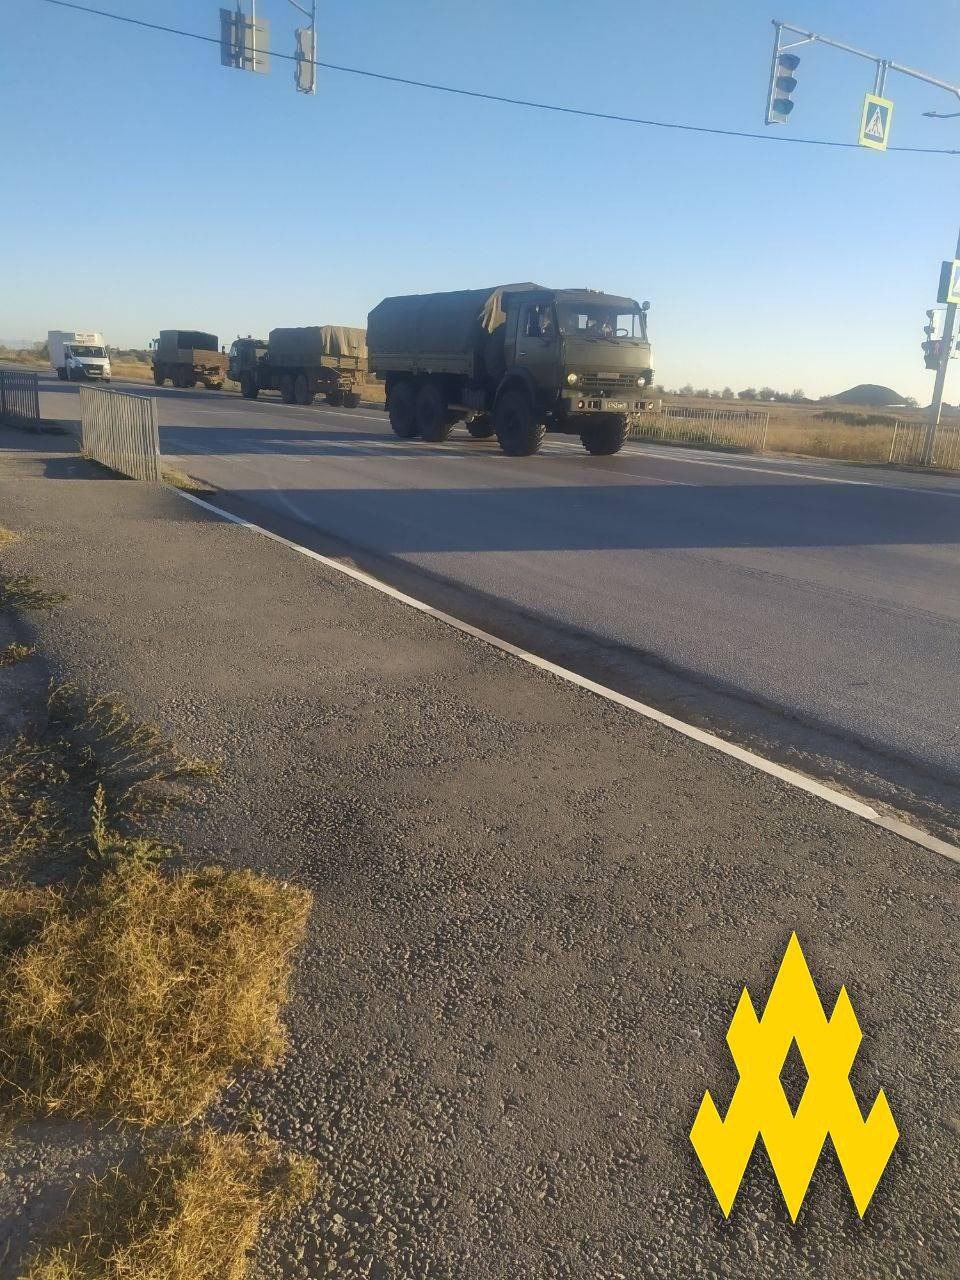 The russians Move Units in Crimea, Prepare for Defense, Being in Fear of Ukrainian Troops' Offensive, Defense Express